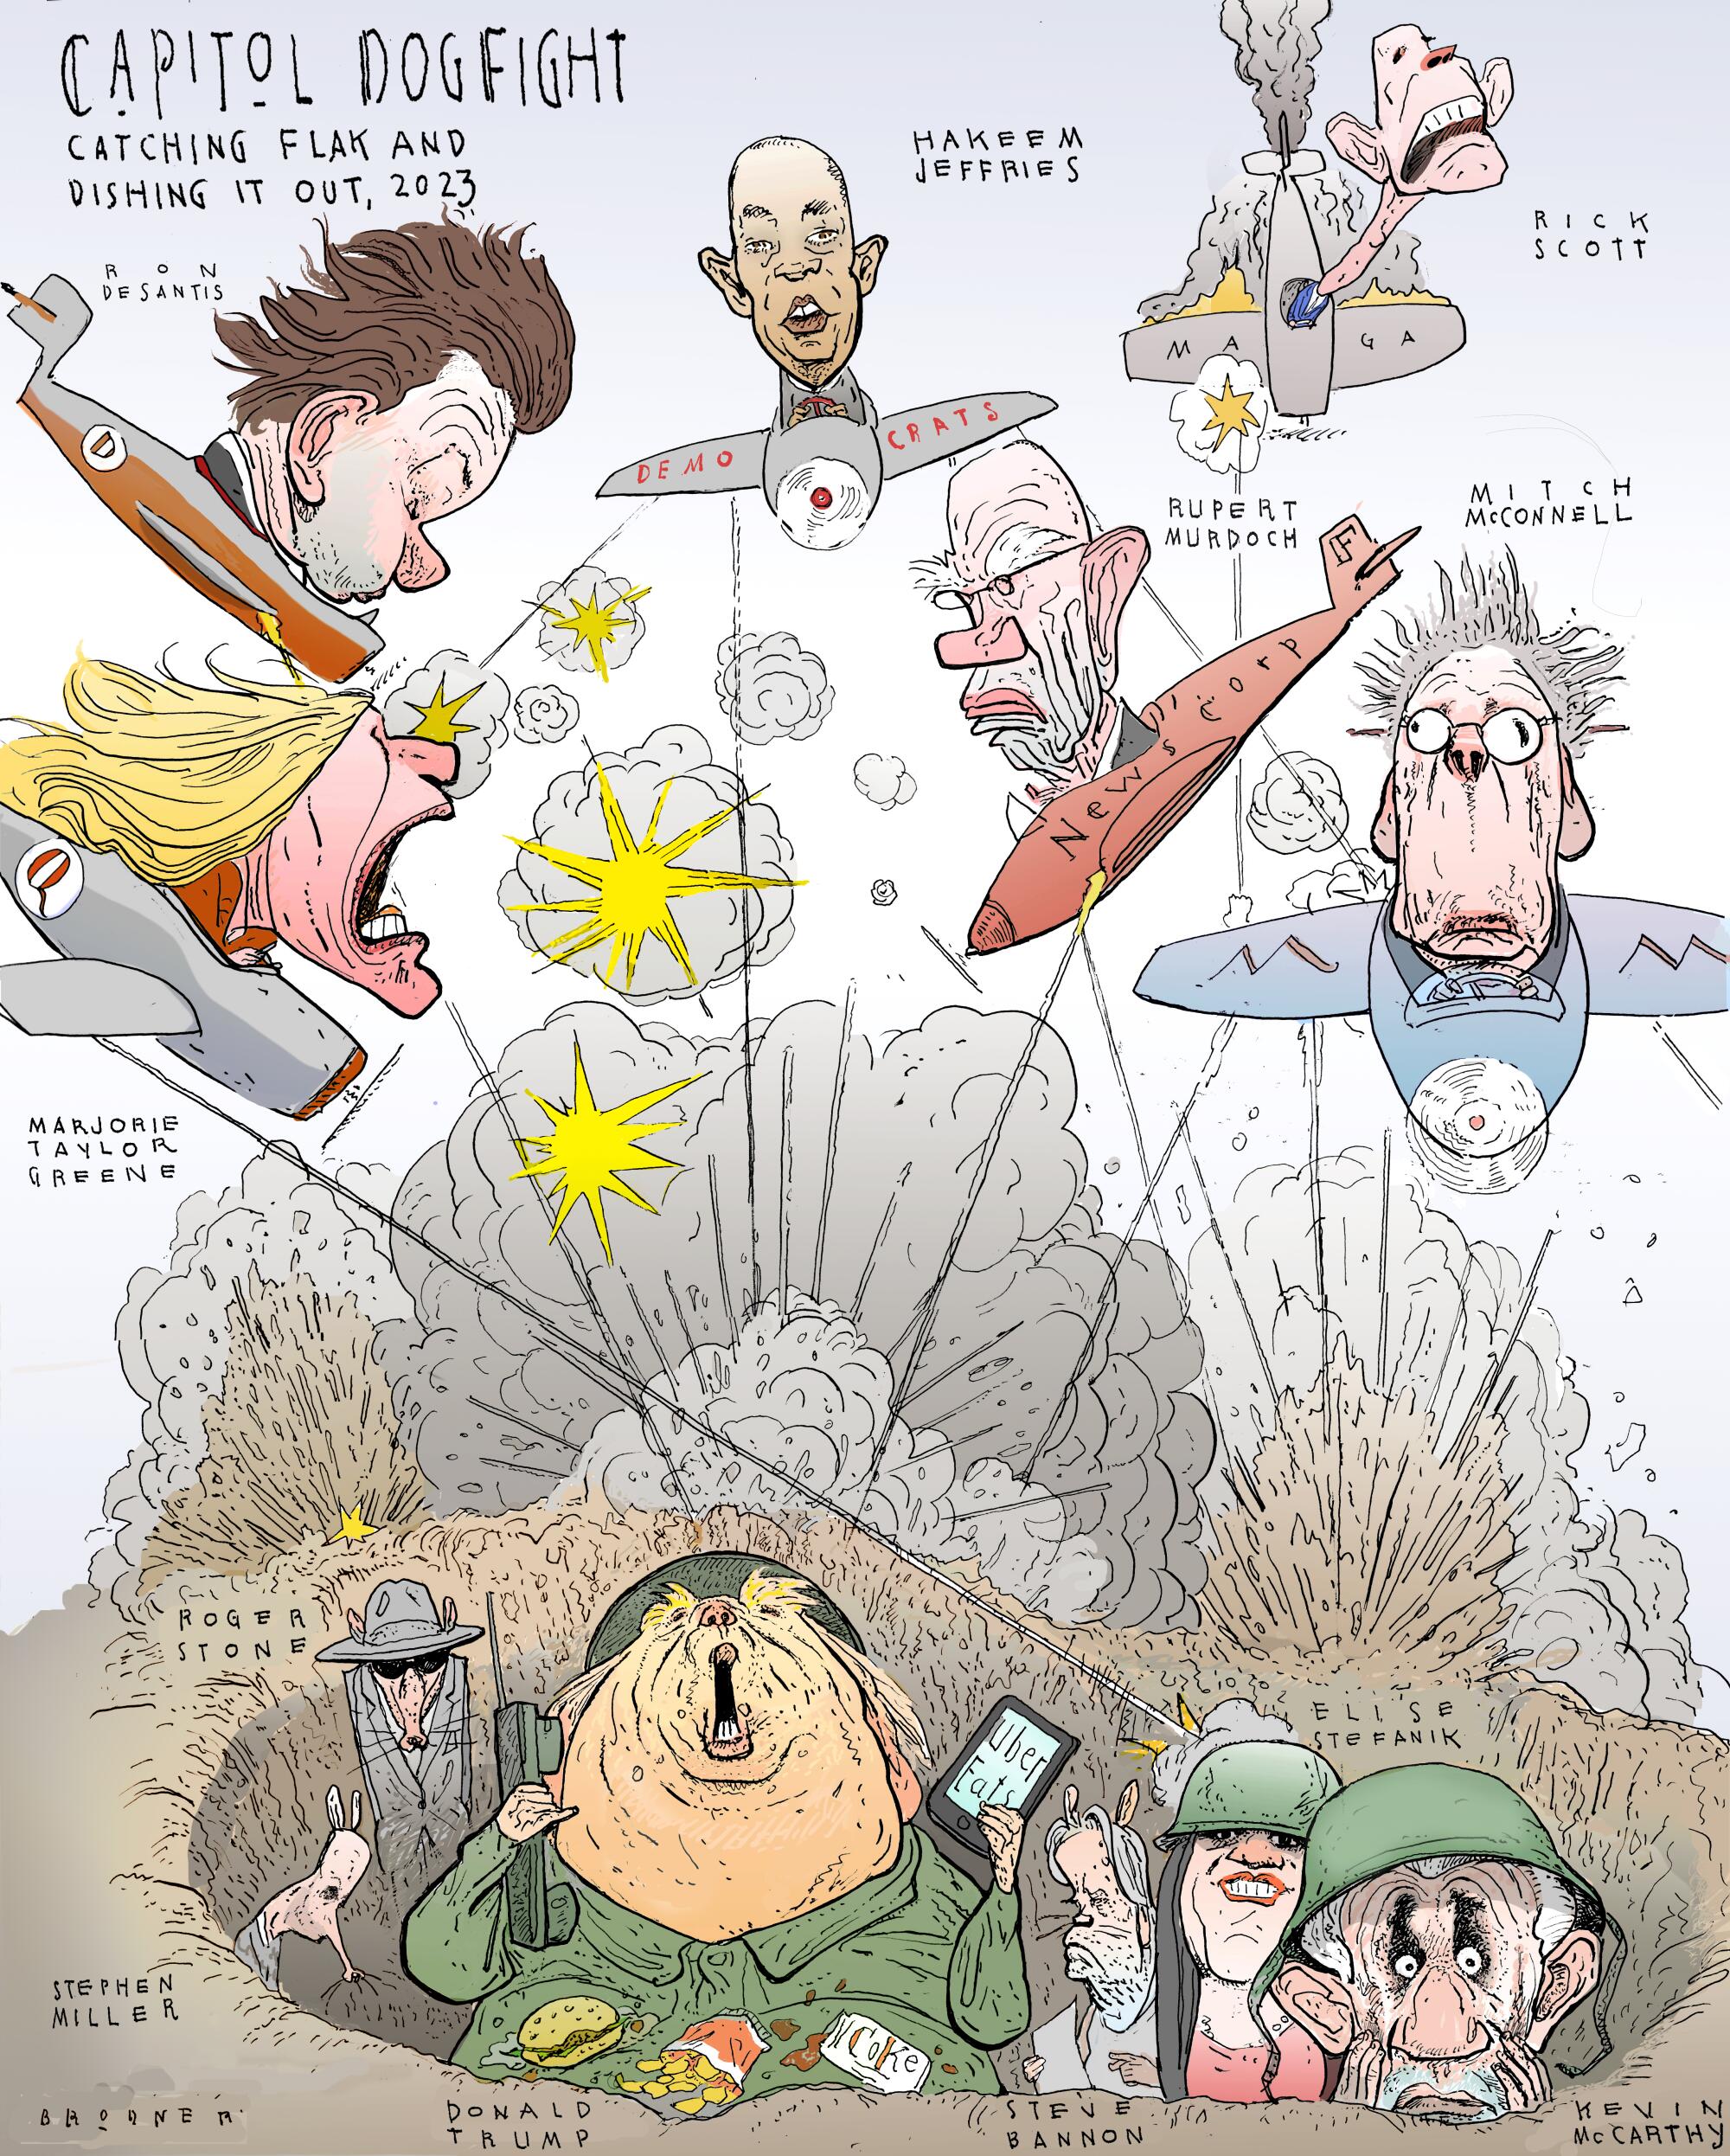 Illustration of Donald Trump in a foxhole as he's being fired upon by figures in fighter planes above.